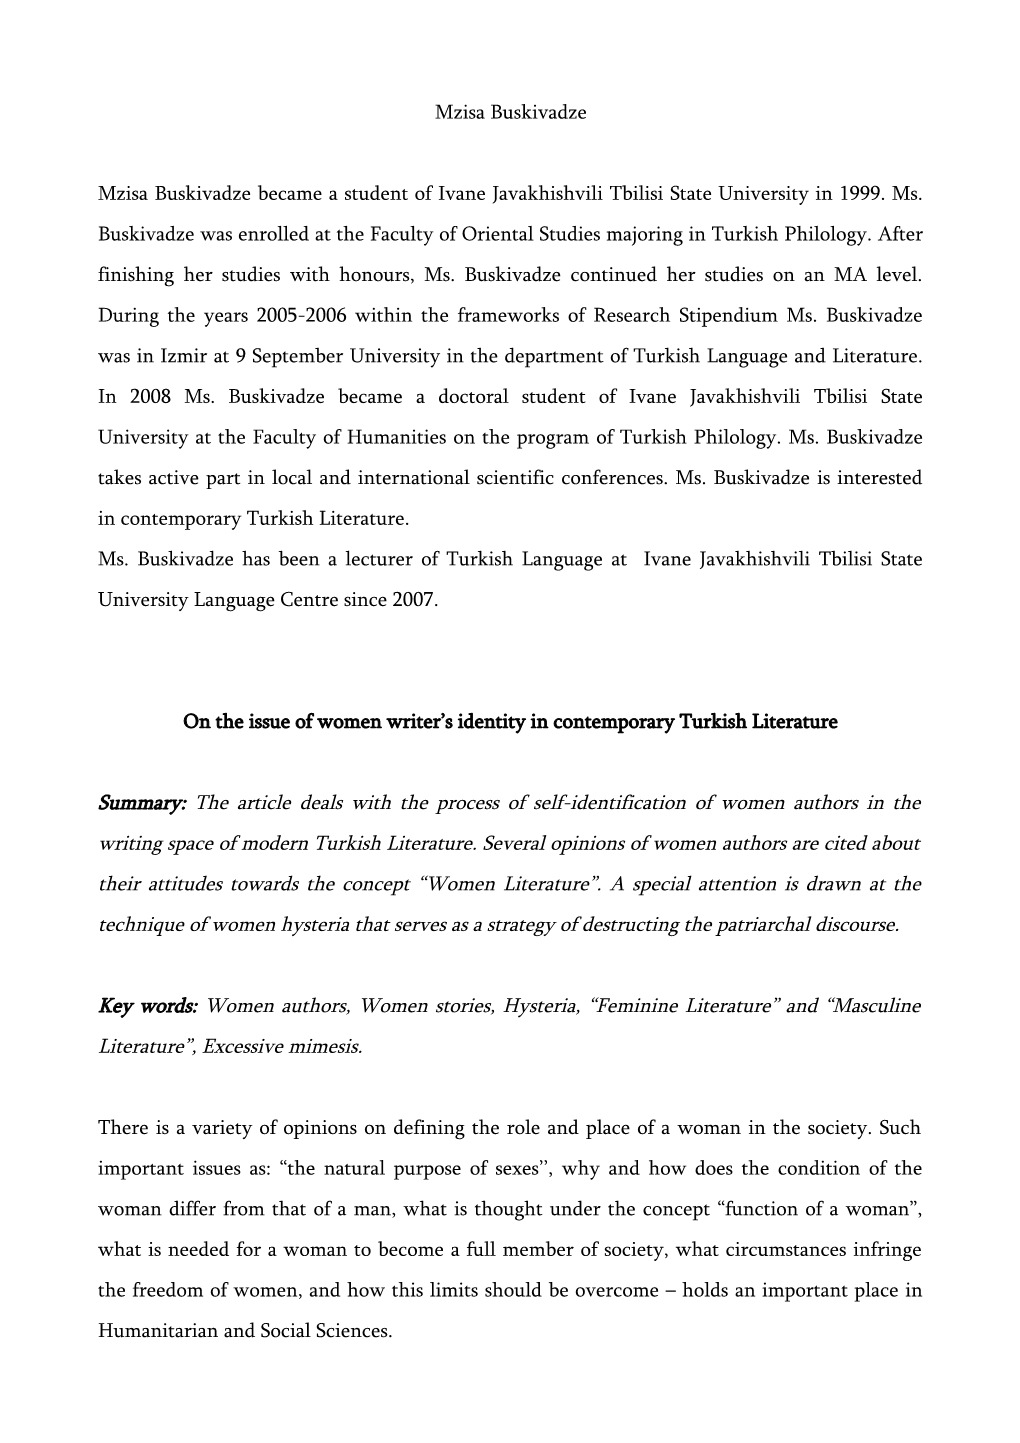 On the Issue of Women Writer S Identity in Contemporary Turkish Literature